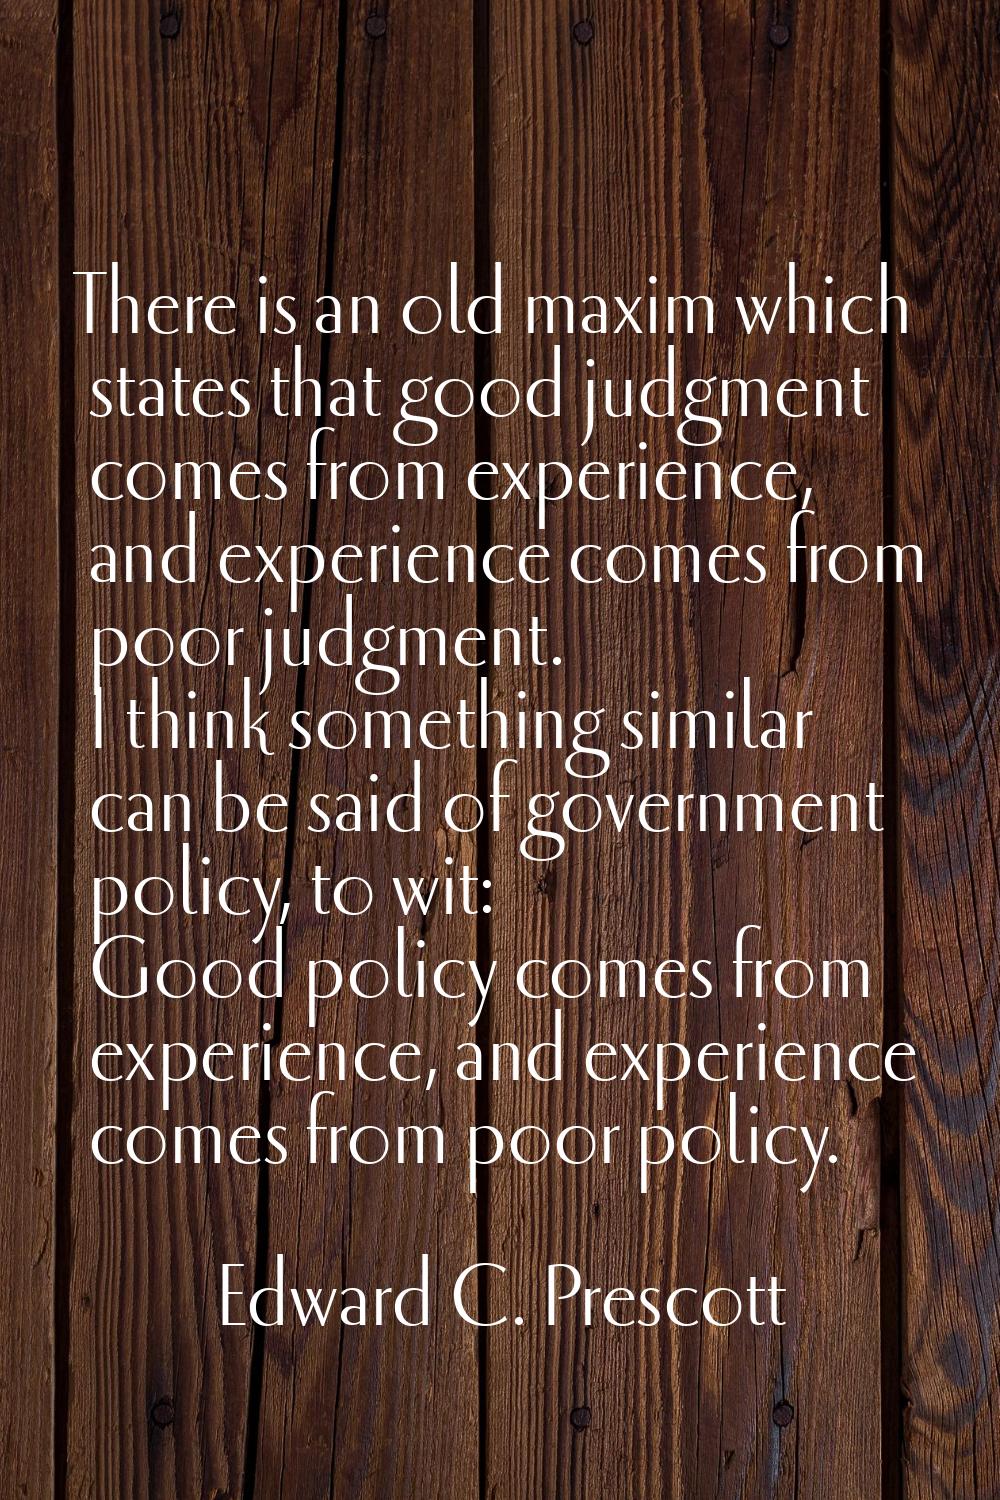 There is an old maxim which states that good judgment comes from experience, and experience comes f